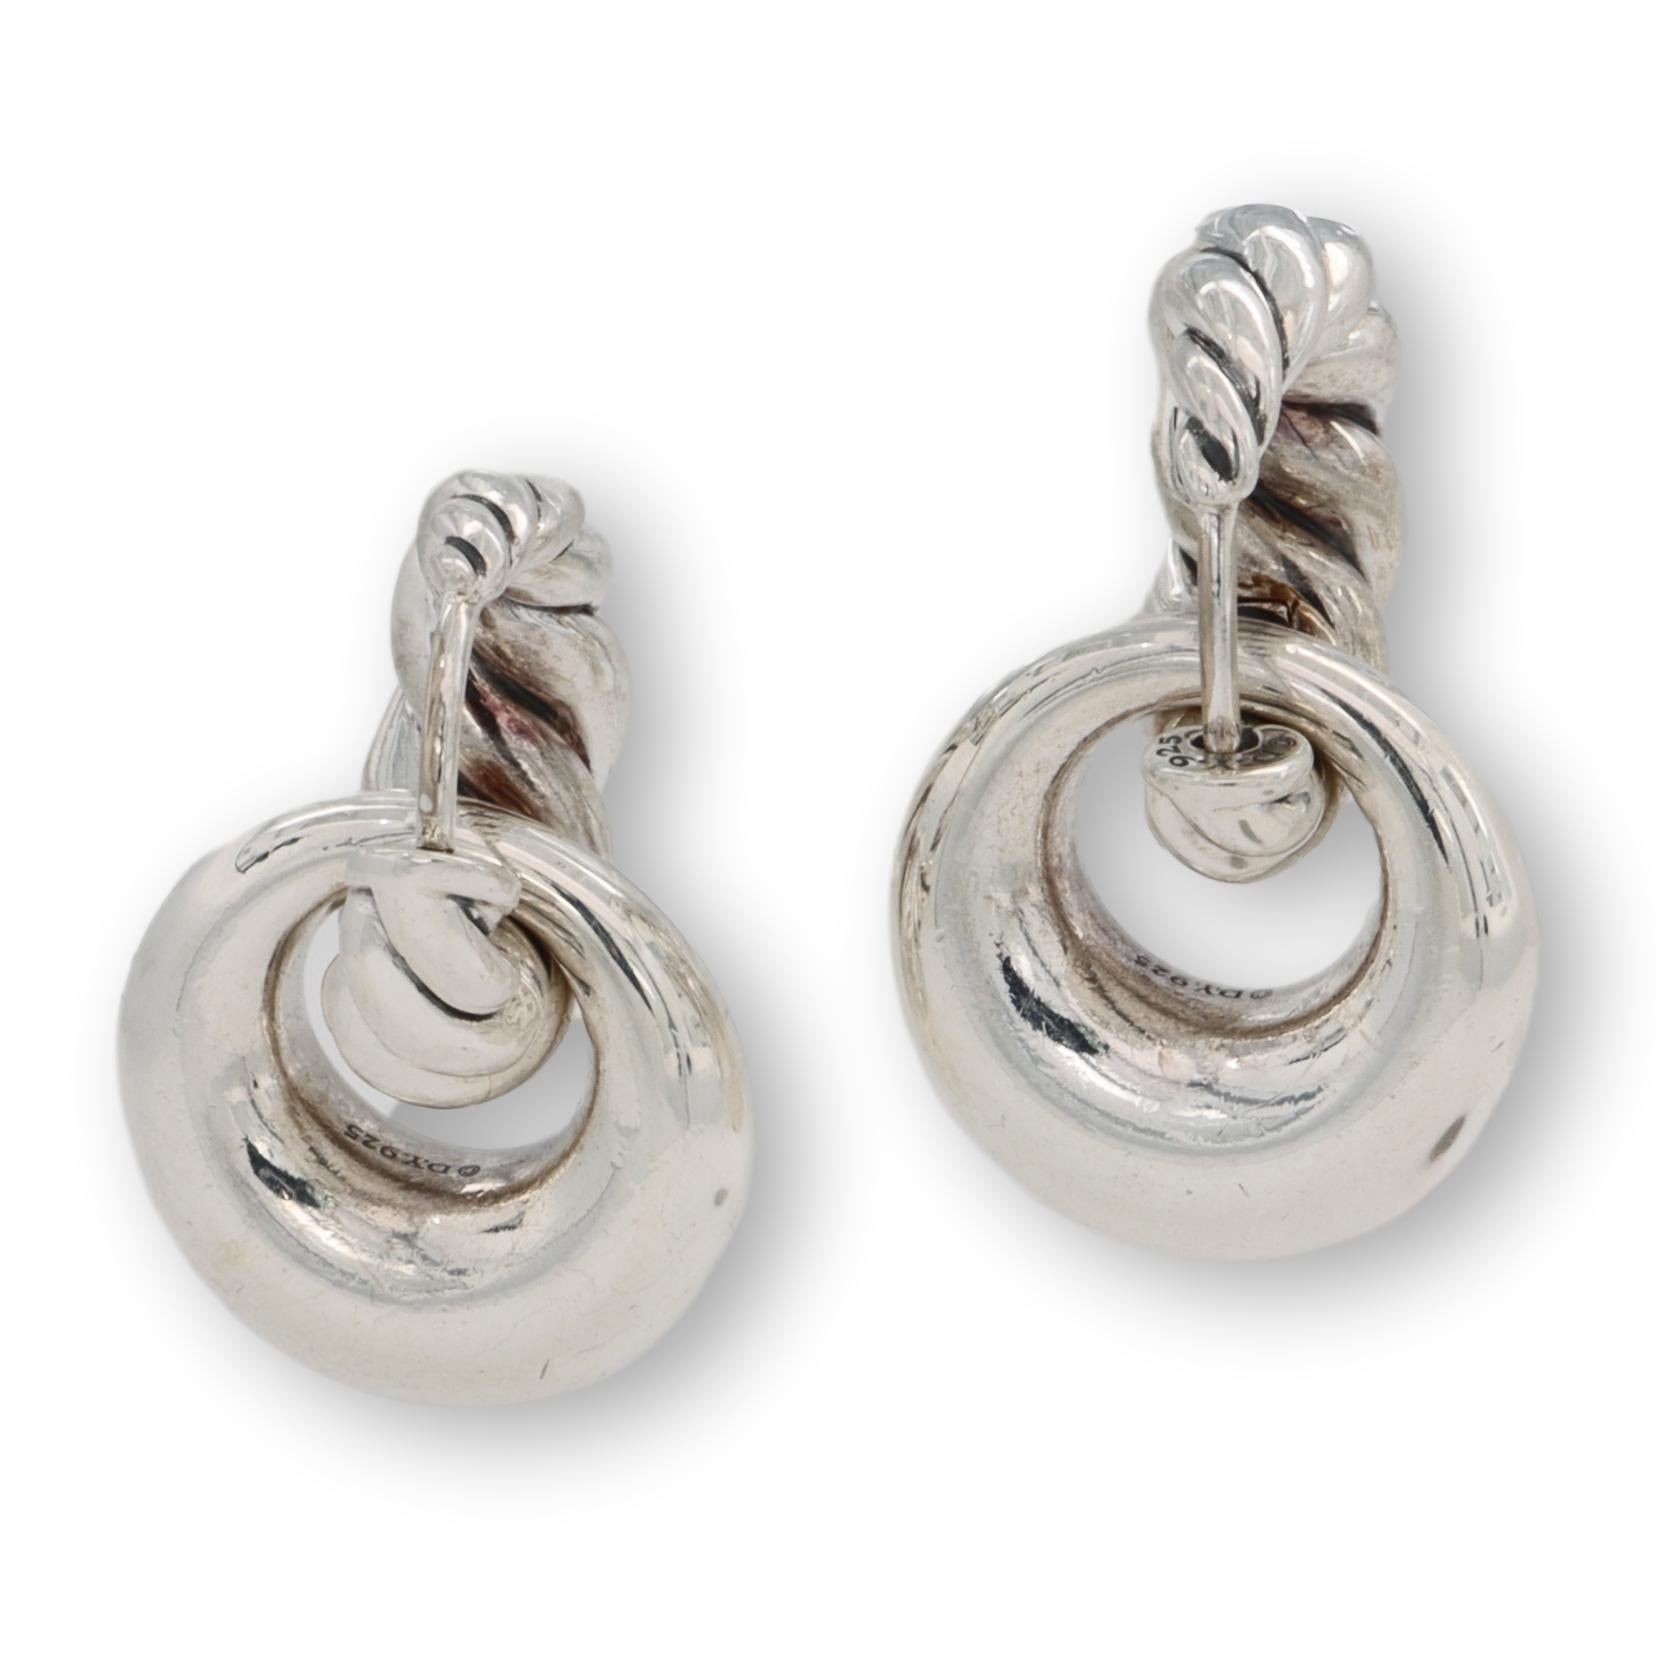 David Yurman door knocker detachable earrings from the pure form collection finely crafted in sterling silver featuring a cable huggie on top and a smooth ring on the bottom with a snap closure. Earrings drop 24mm from the ear. Bottom part of